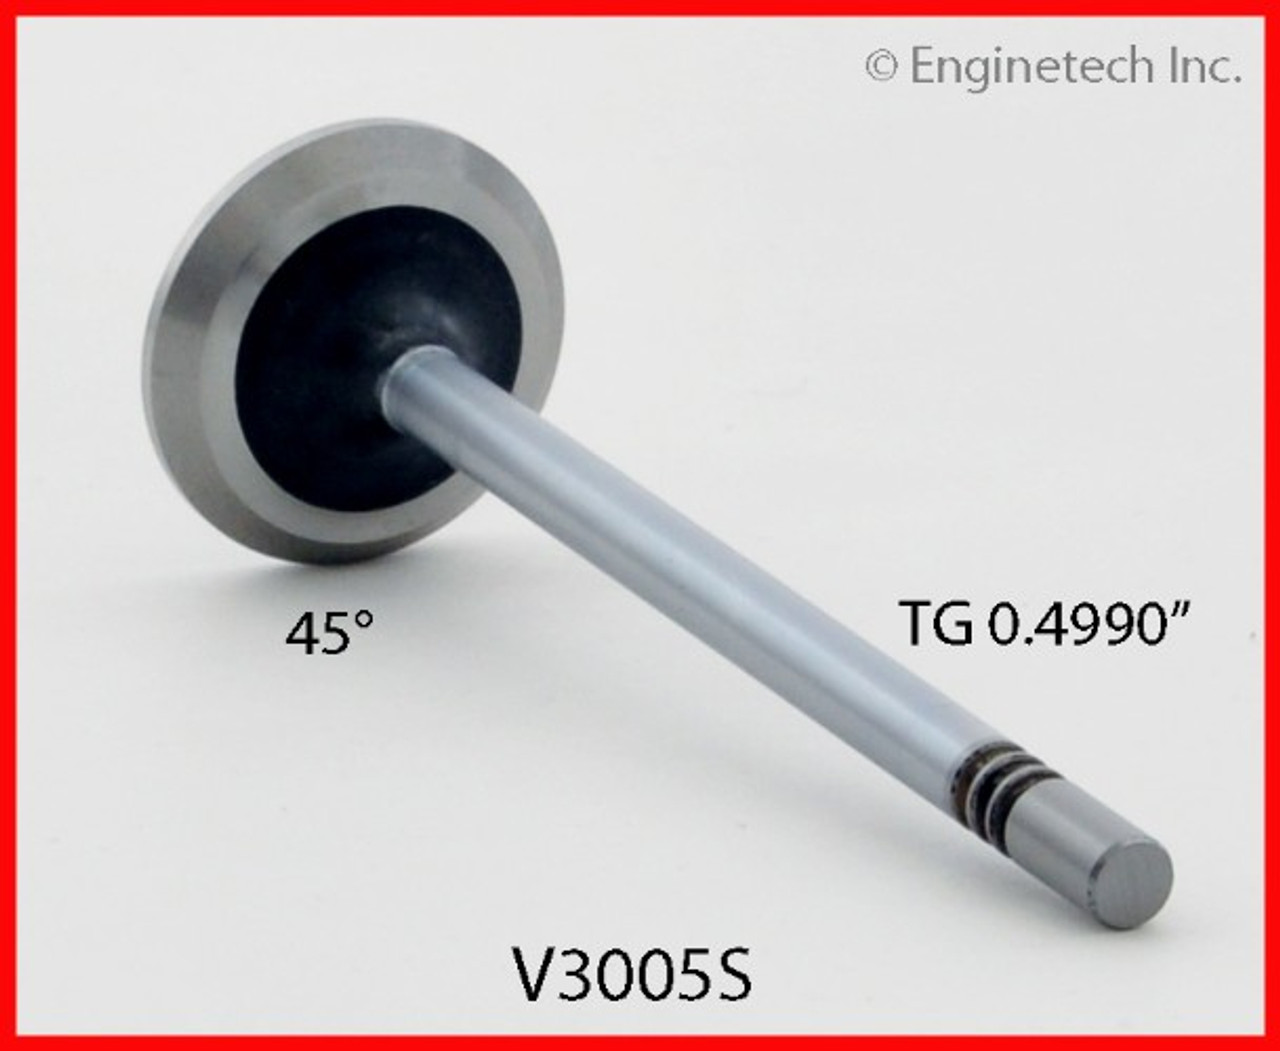 Exhaust Valve - 2000 Ford Mustang 4.6L (V3005S.D36)